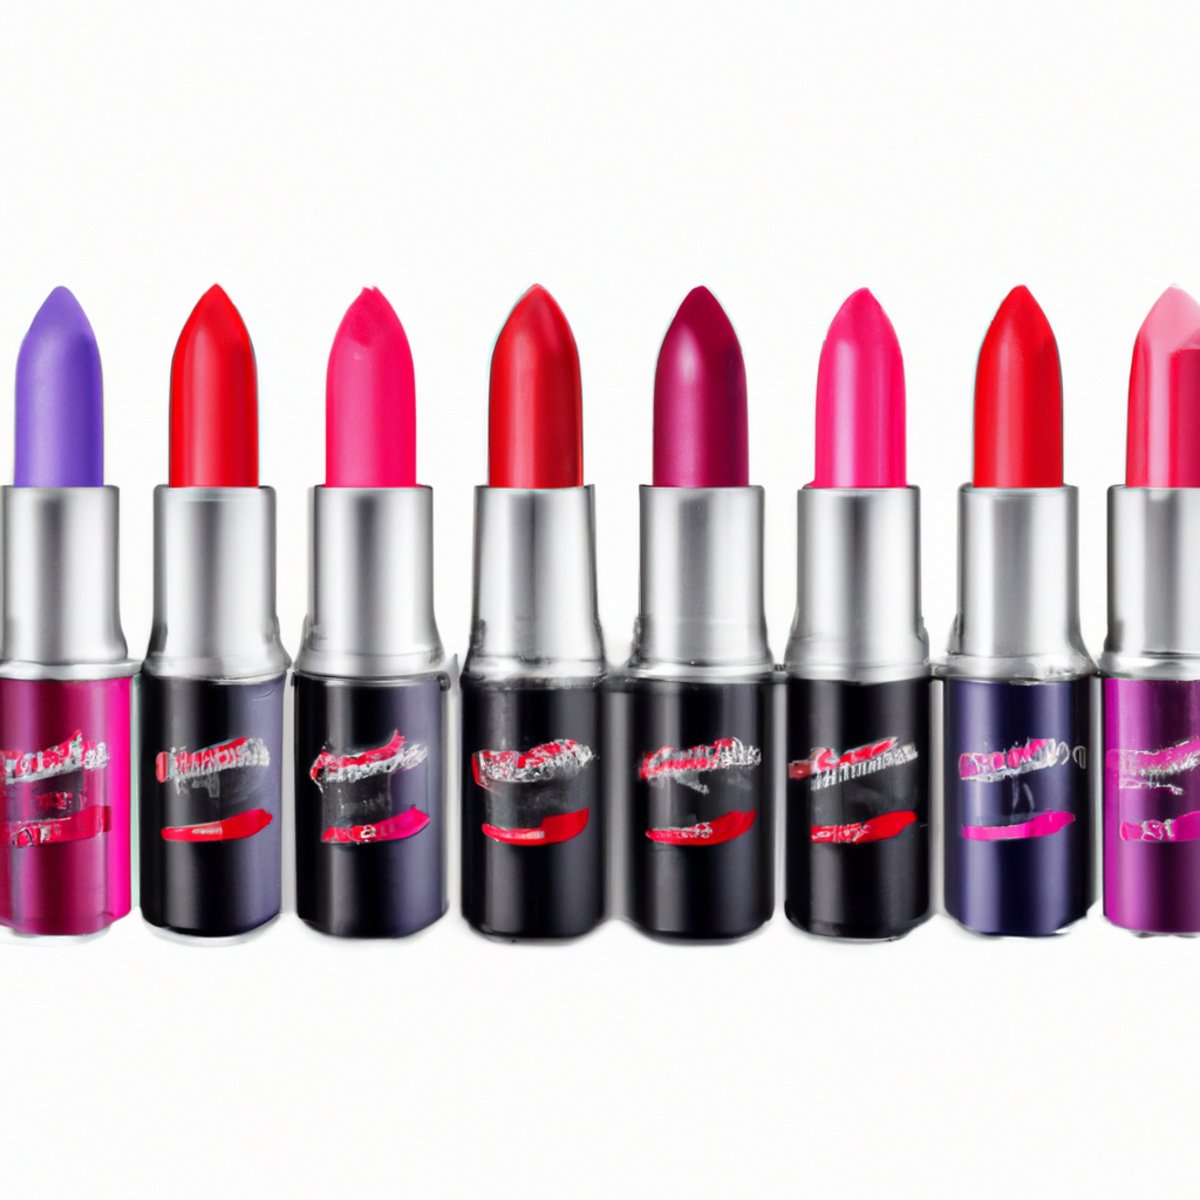 Vibrant array of bold lip colors arranged meticulously on a sleek white background, showcasing a variety of shades.